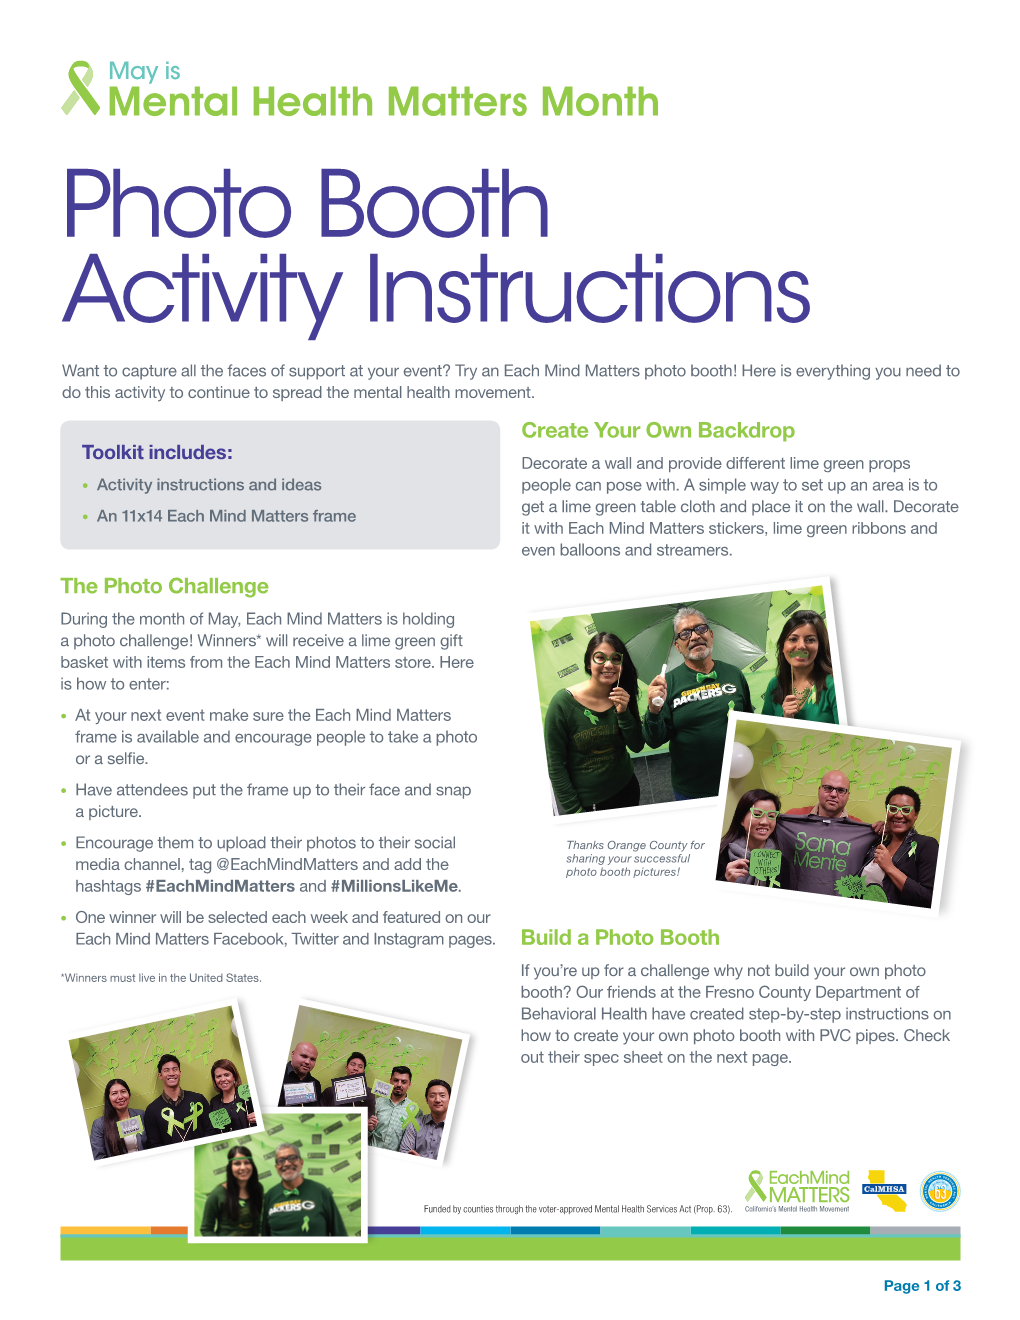 Photo Booth Activity Instructions